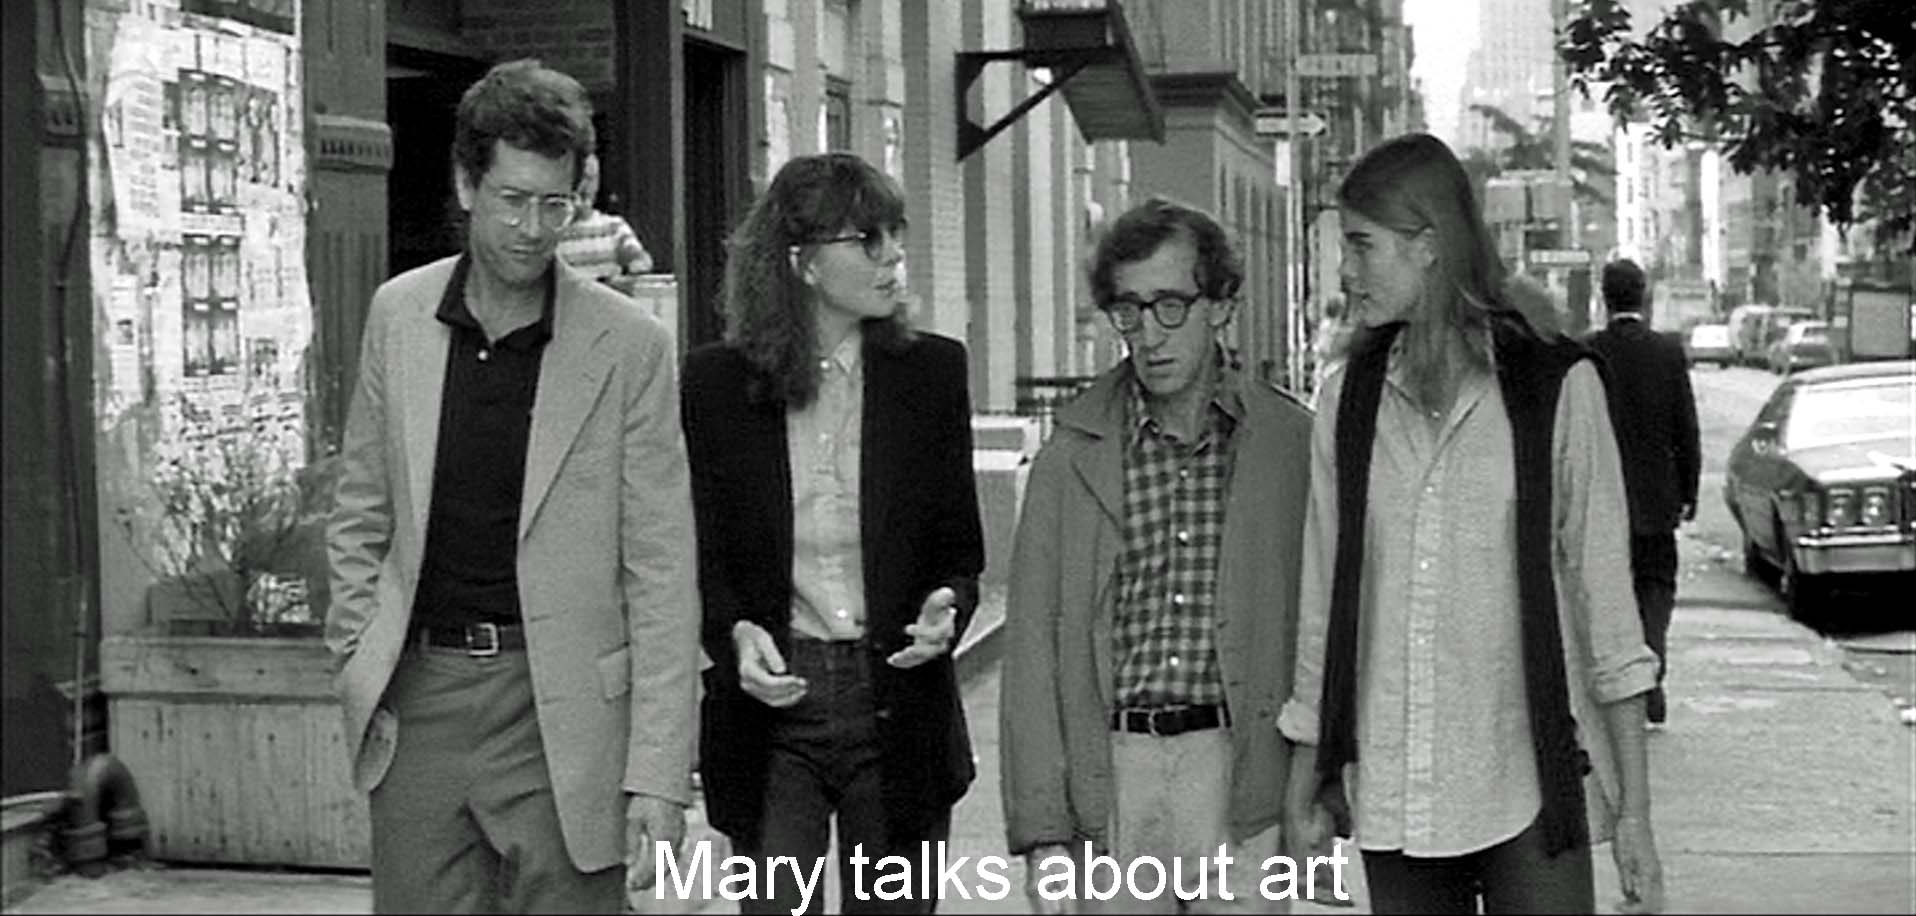 Mary talks about art